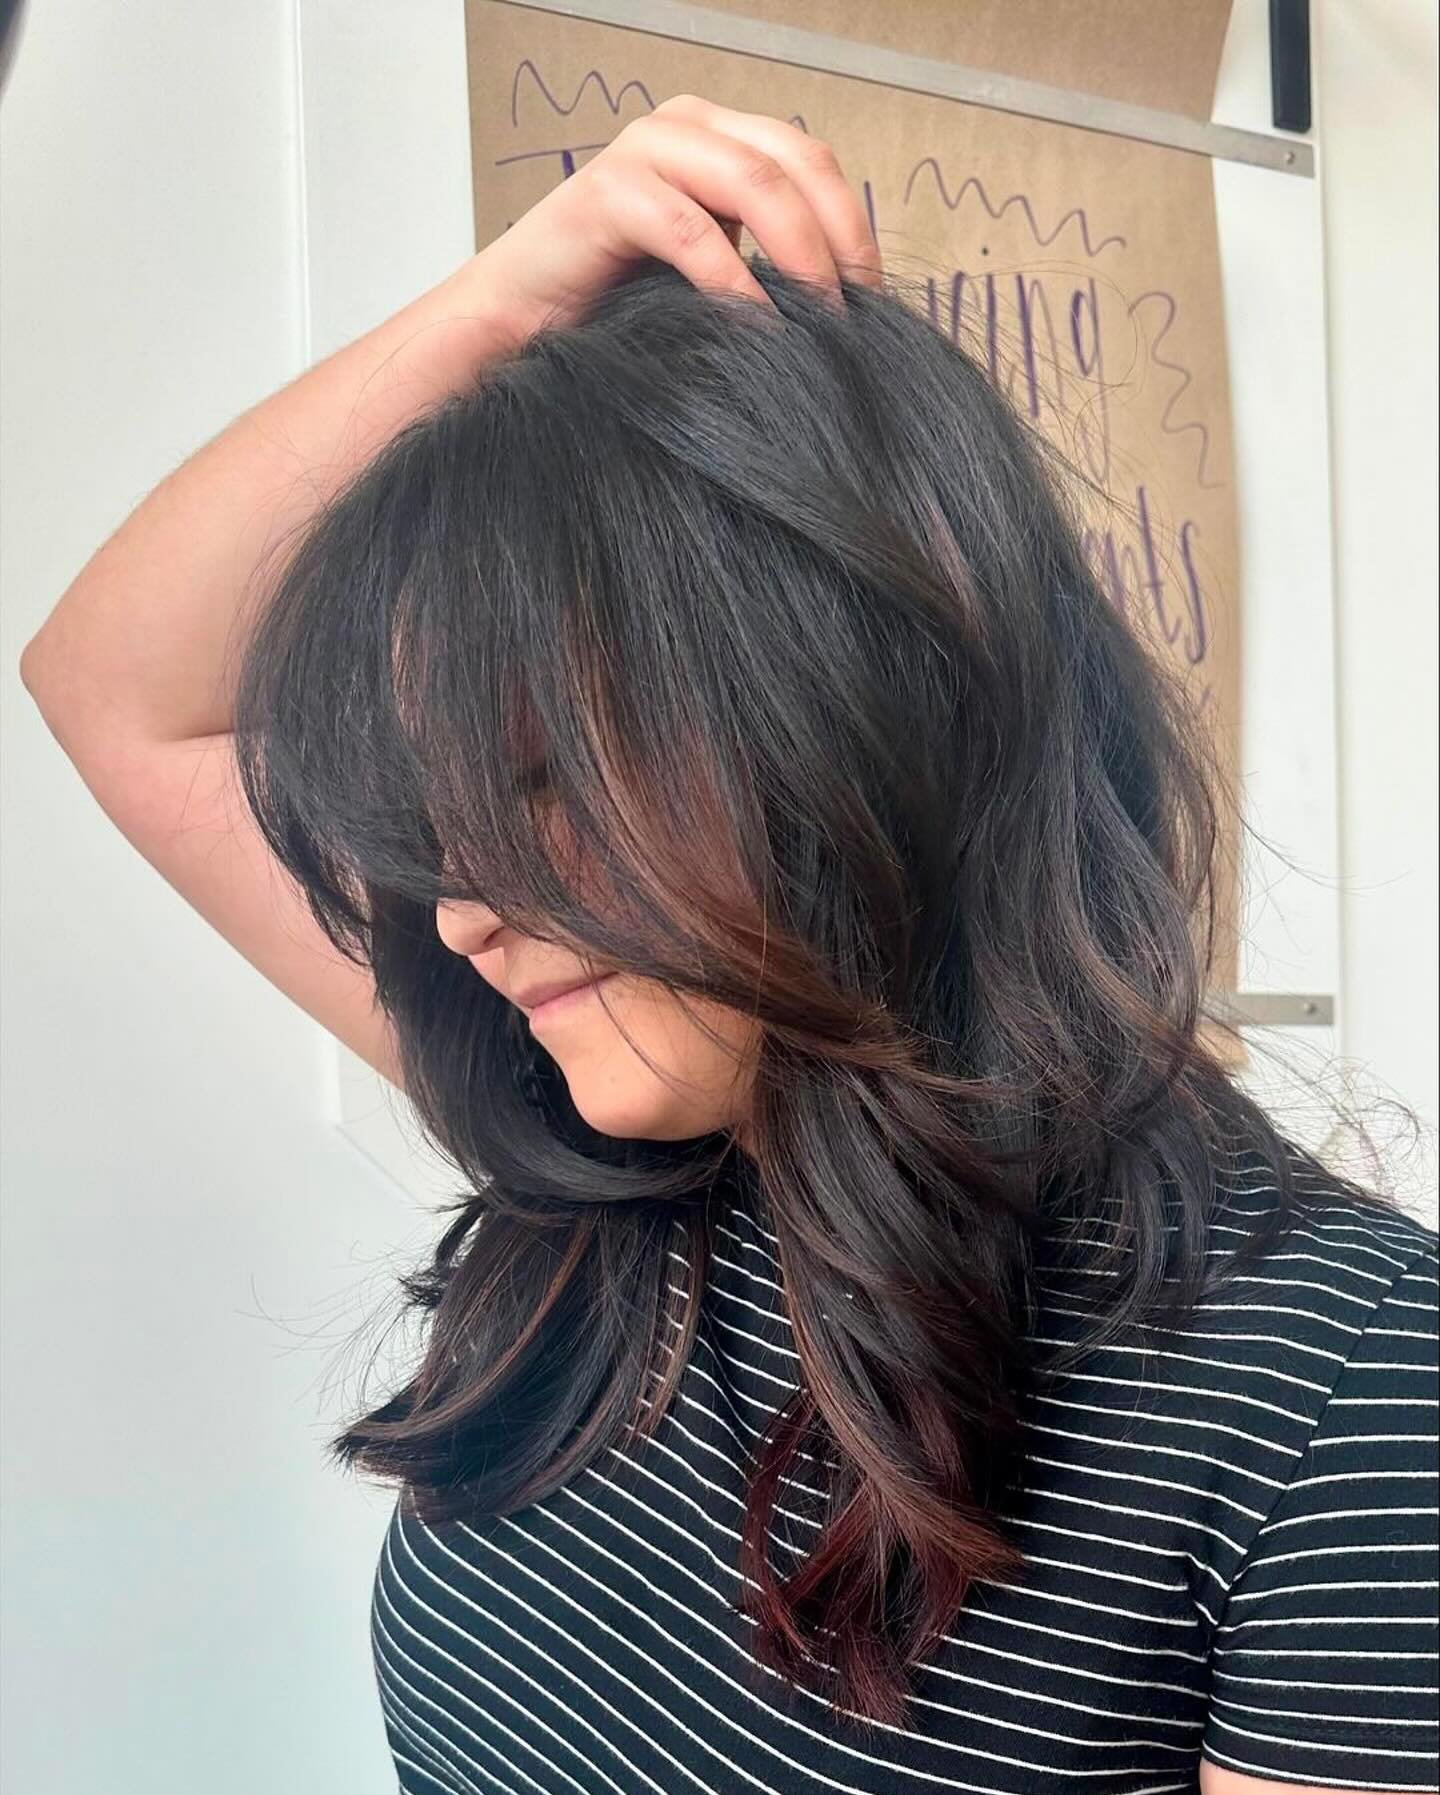 🦋Butterfly shag🦋  swipe all the way for the before⏩️
Link in bio to book ❕

#avedacolor #aveda #avedastylist #avedaartist #avedasalon #dentontx #dentonhair #dentonhairstylist #dfwhair #dfwhairscene #btc #elevatehair #avedacustomcolor #davantisalon 